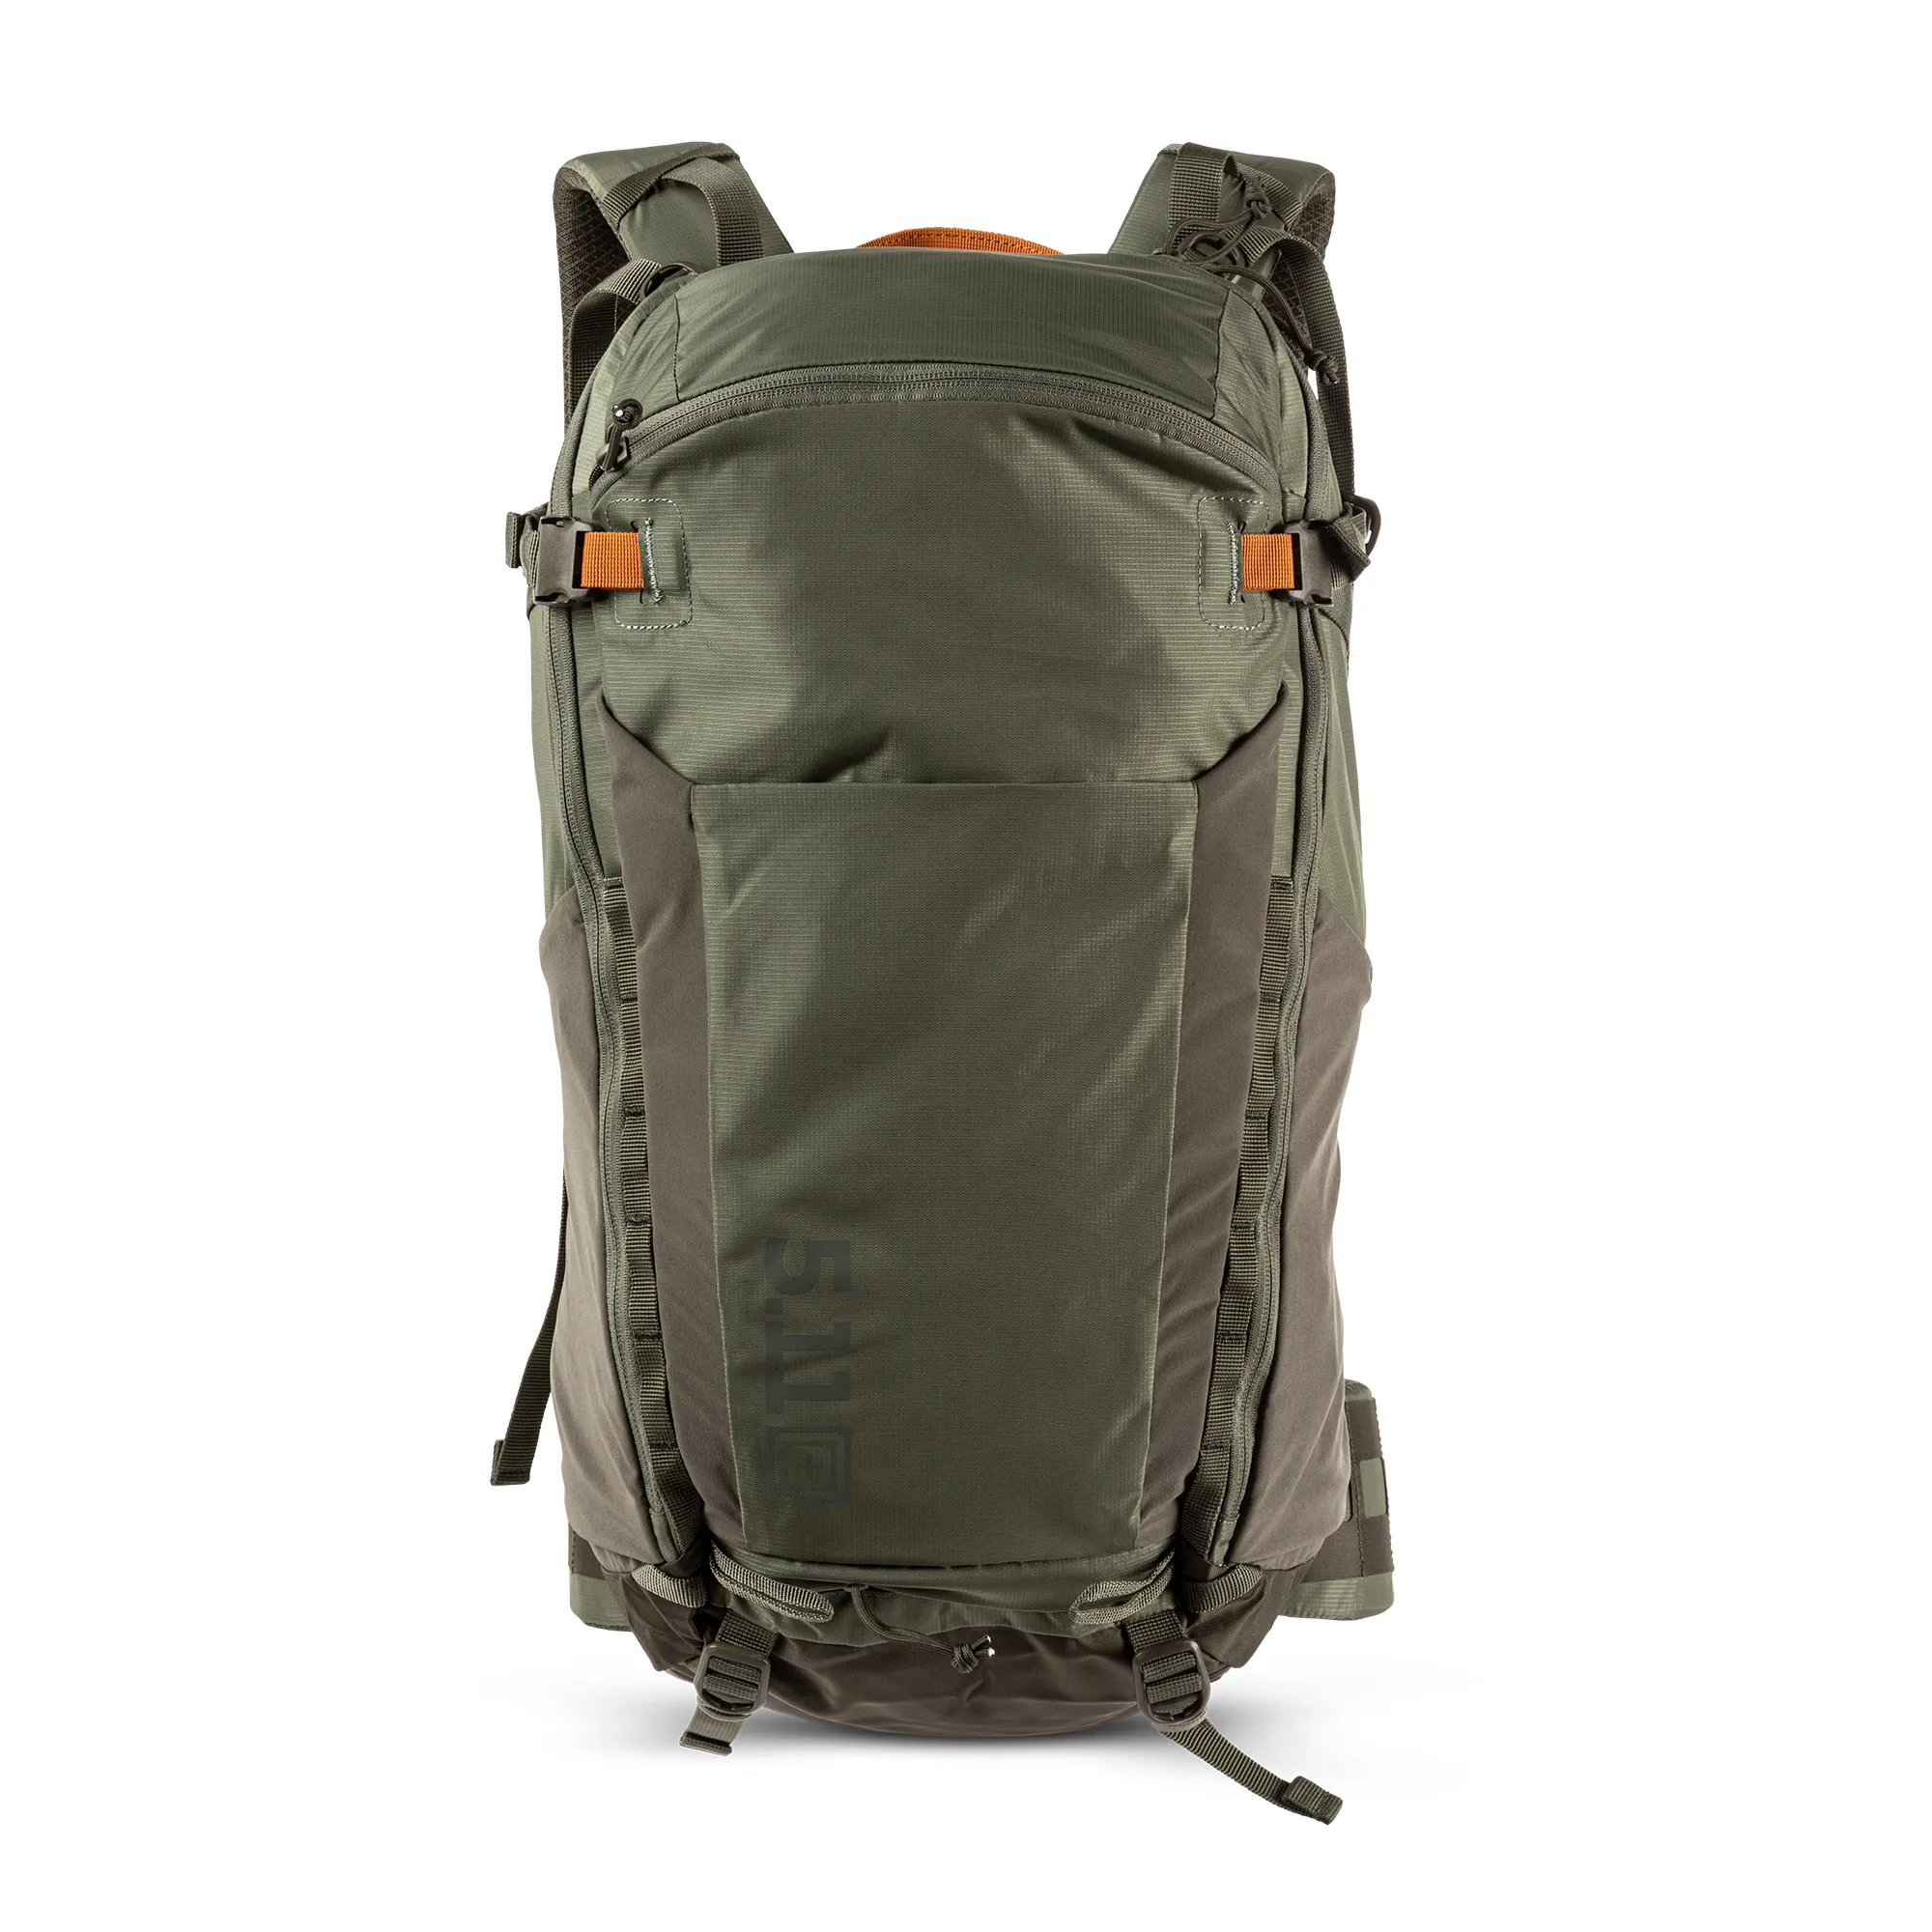 Skyweight 36L Pack Sage Green, S/M